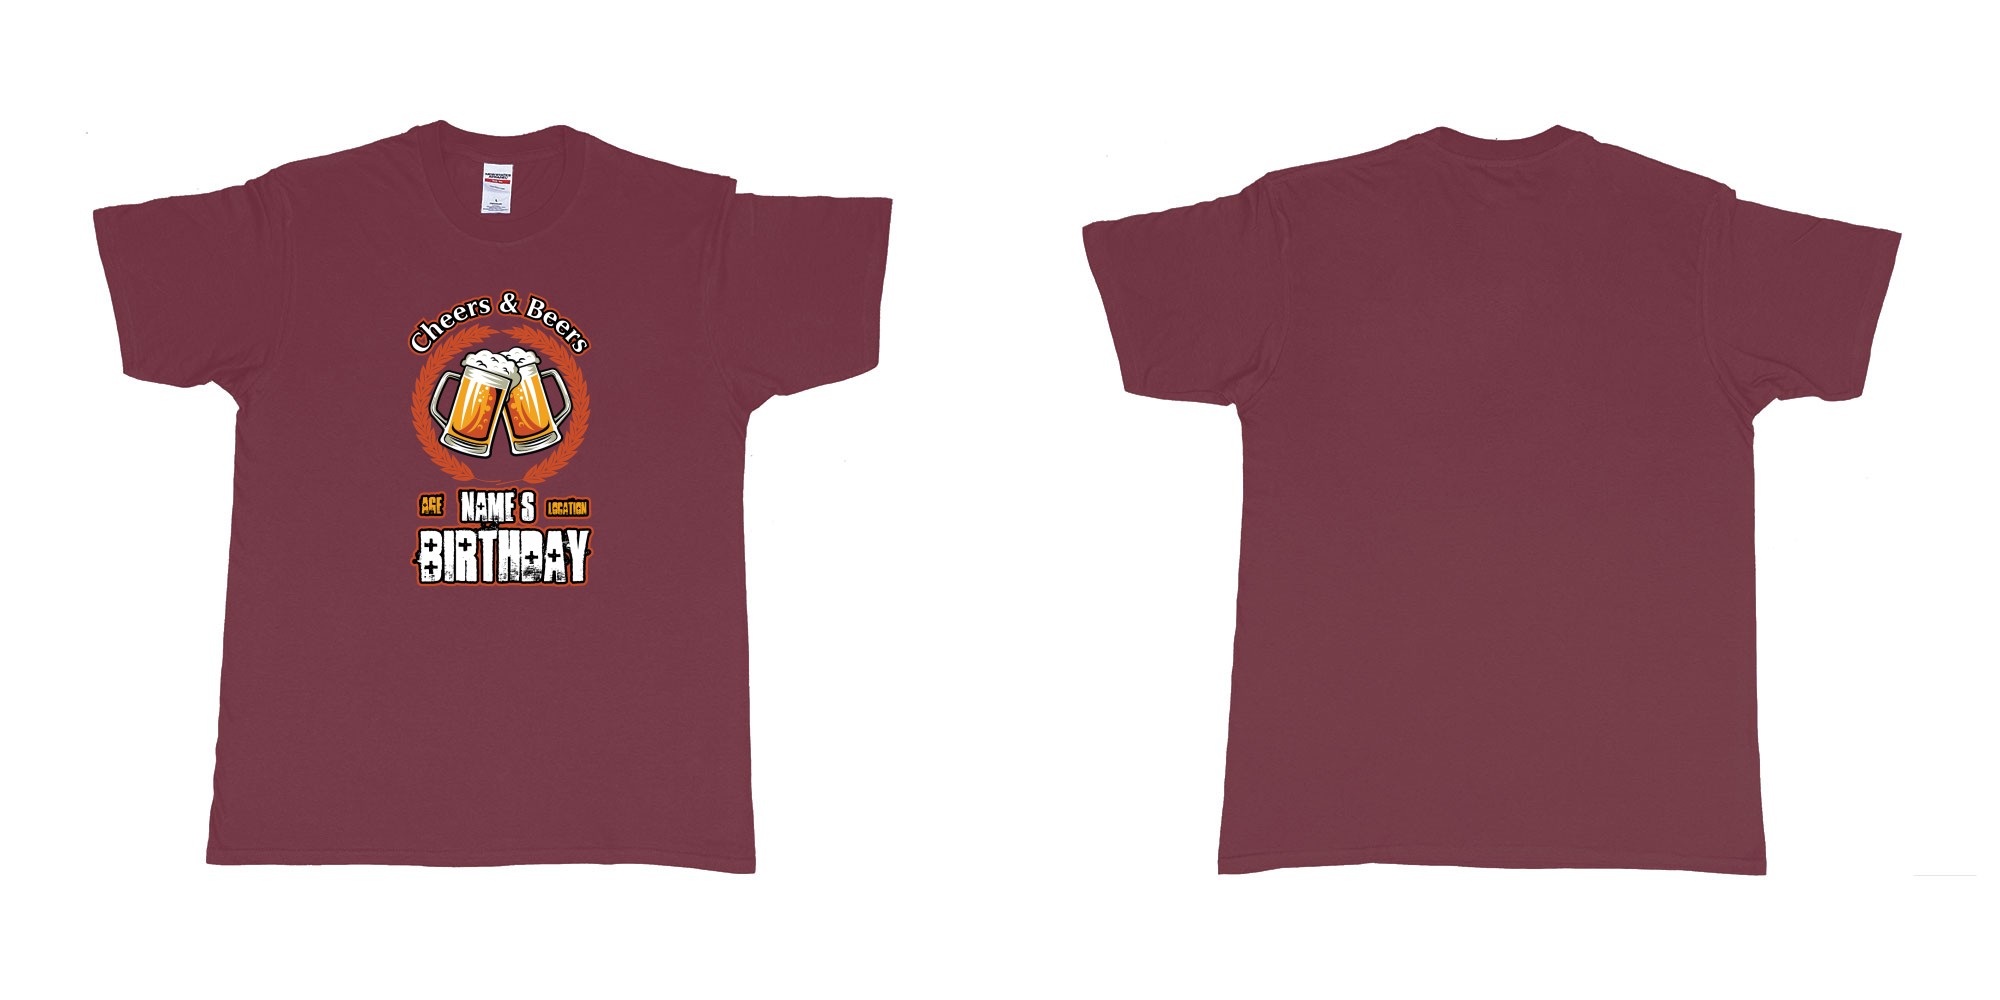 Custom tshirt design cheers and beers birthday in fabric color marron choice your own text made in Bali by The Pirate Way